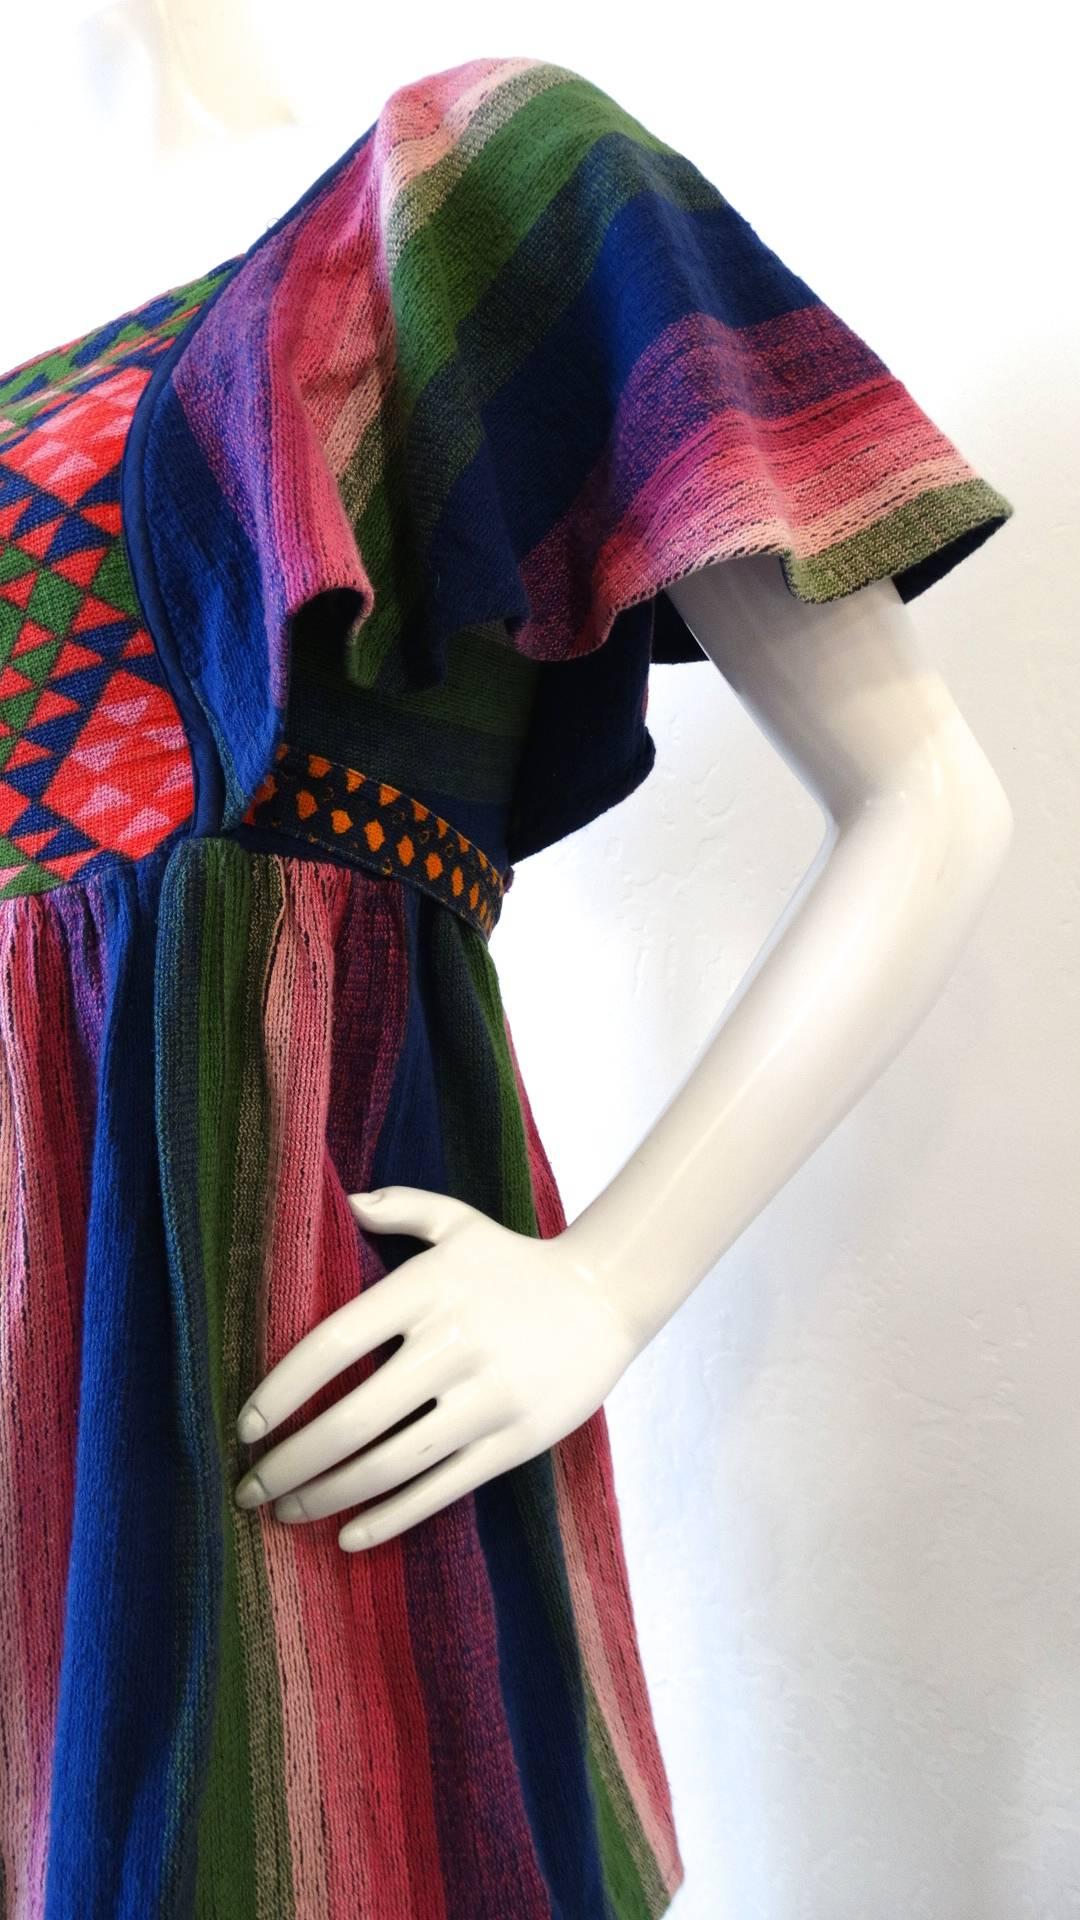 We love a good piece from Israeli designer Rikma- and you will too with our amazing 1970s Butterfly Sleeve top! Made of Rikmas signature thick woven cotton in a striped pattern, shades of pink, violet, blue and green! Empire waisted fit with a tie